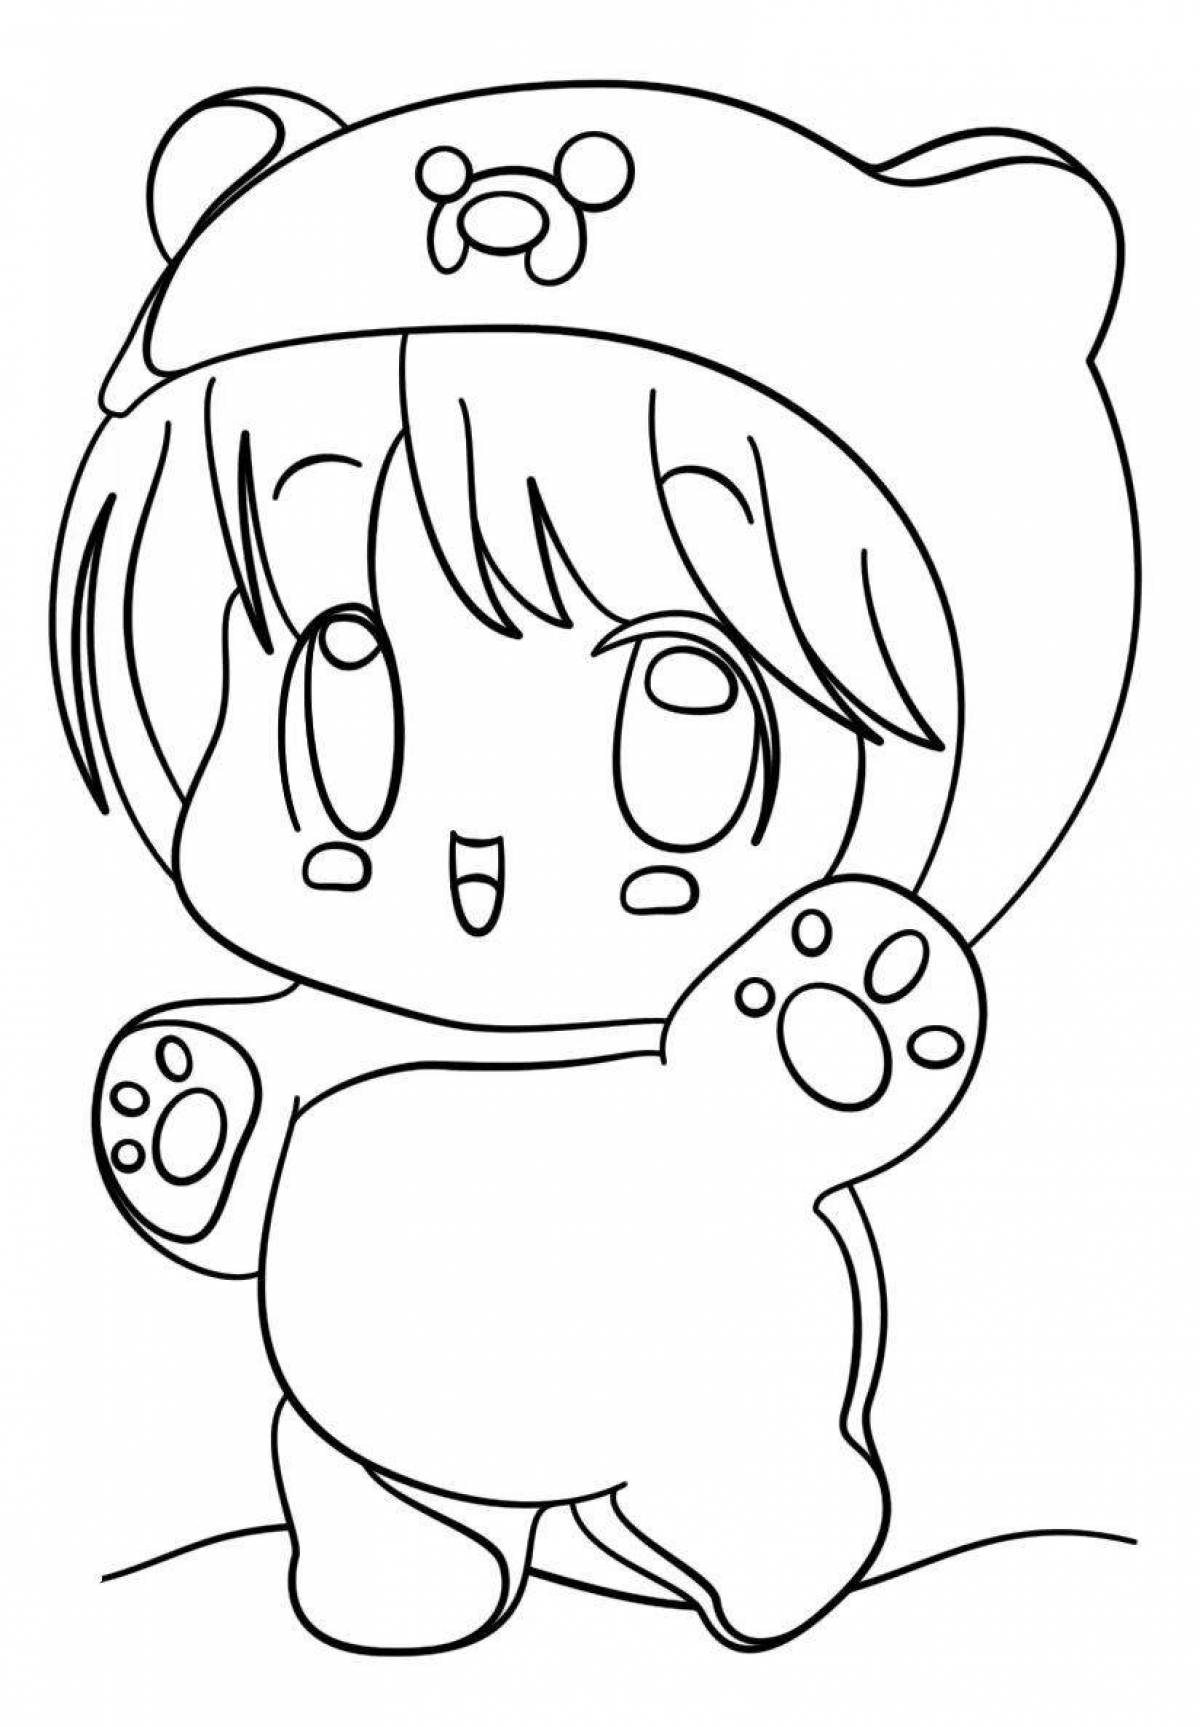 Exquisite kawaii girls coloring pages